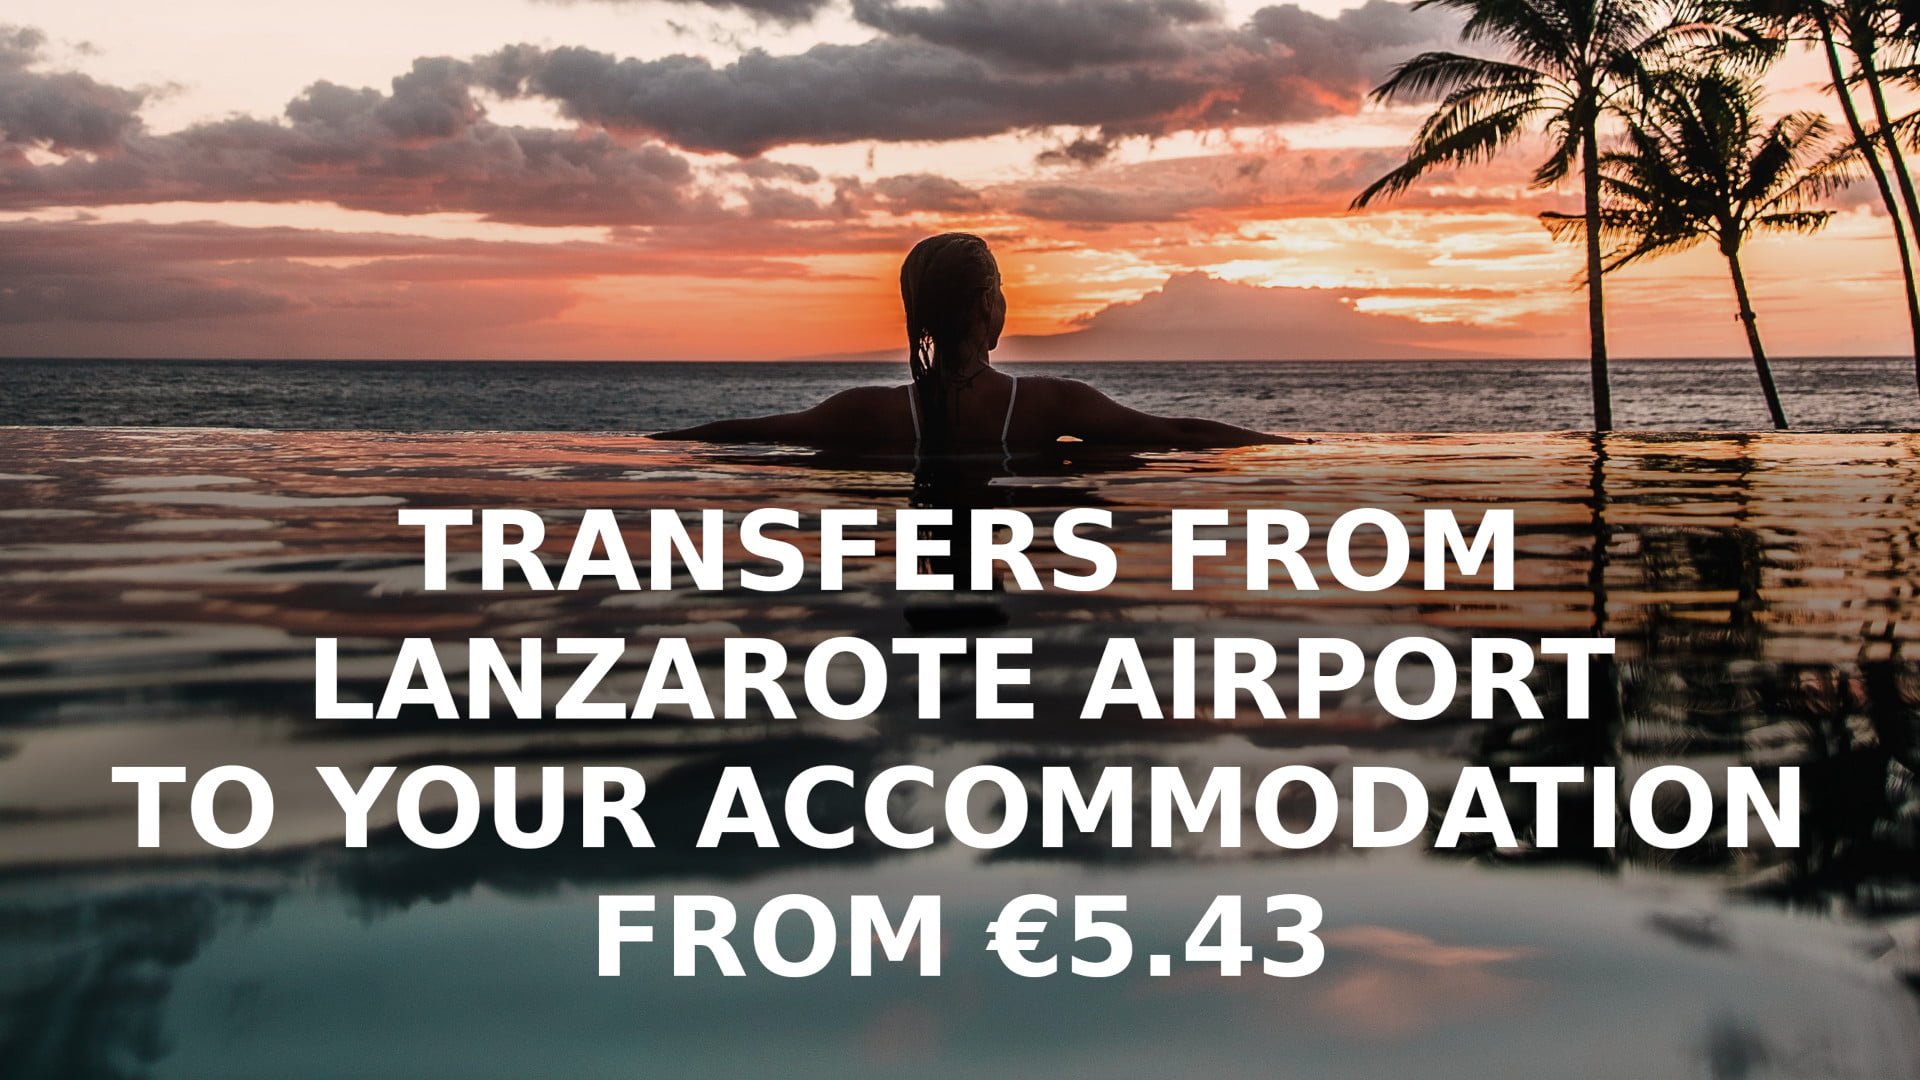 Transfers from Lanzarote Airport to your Accommodation